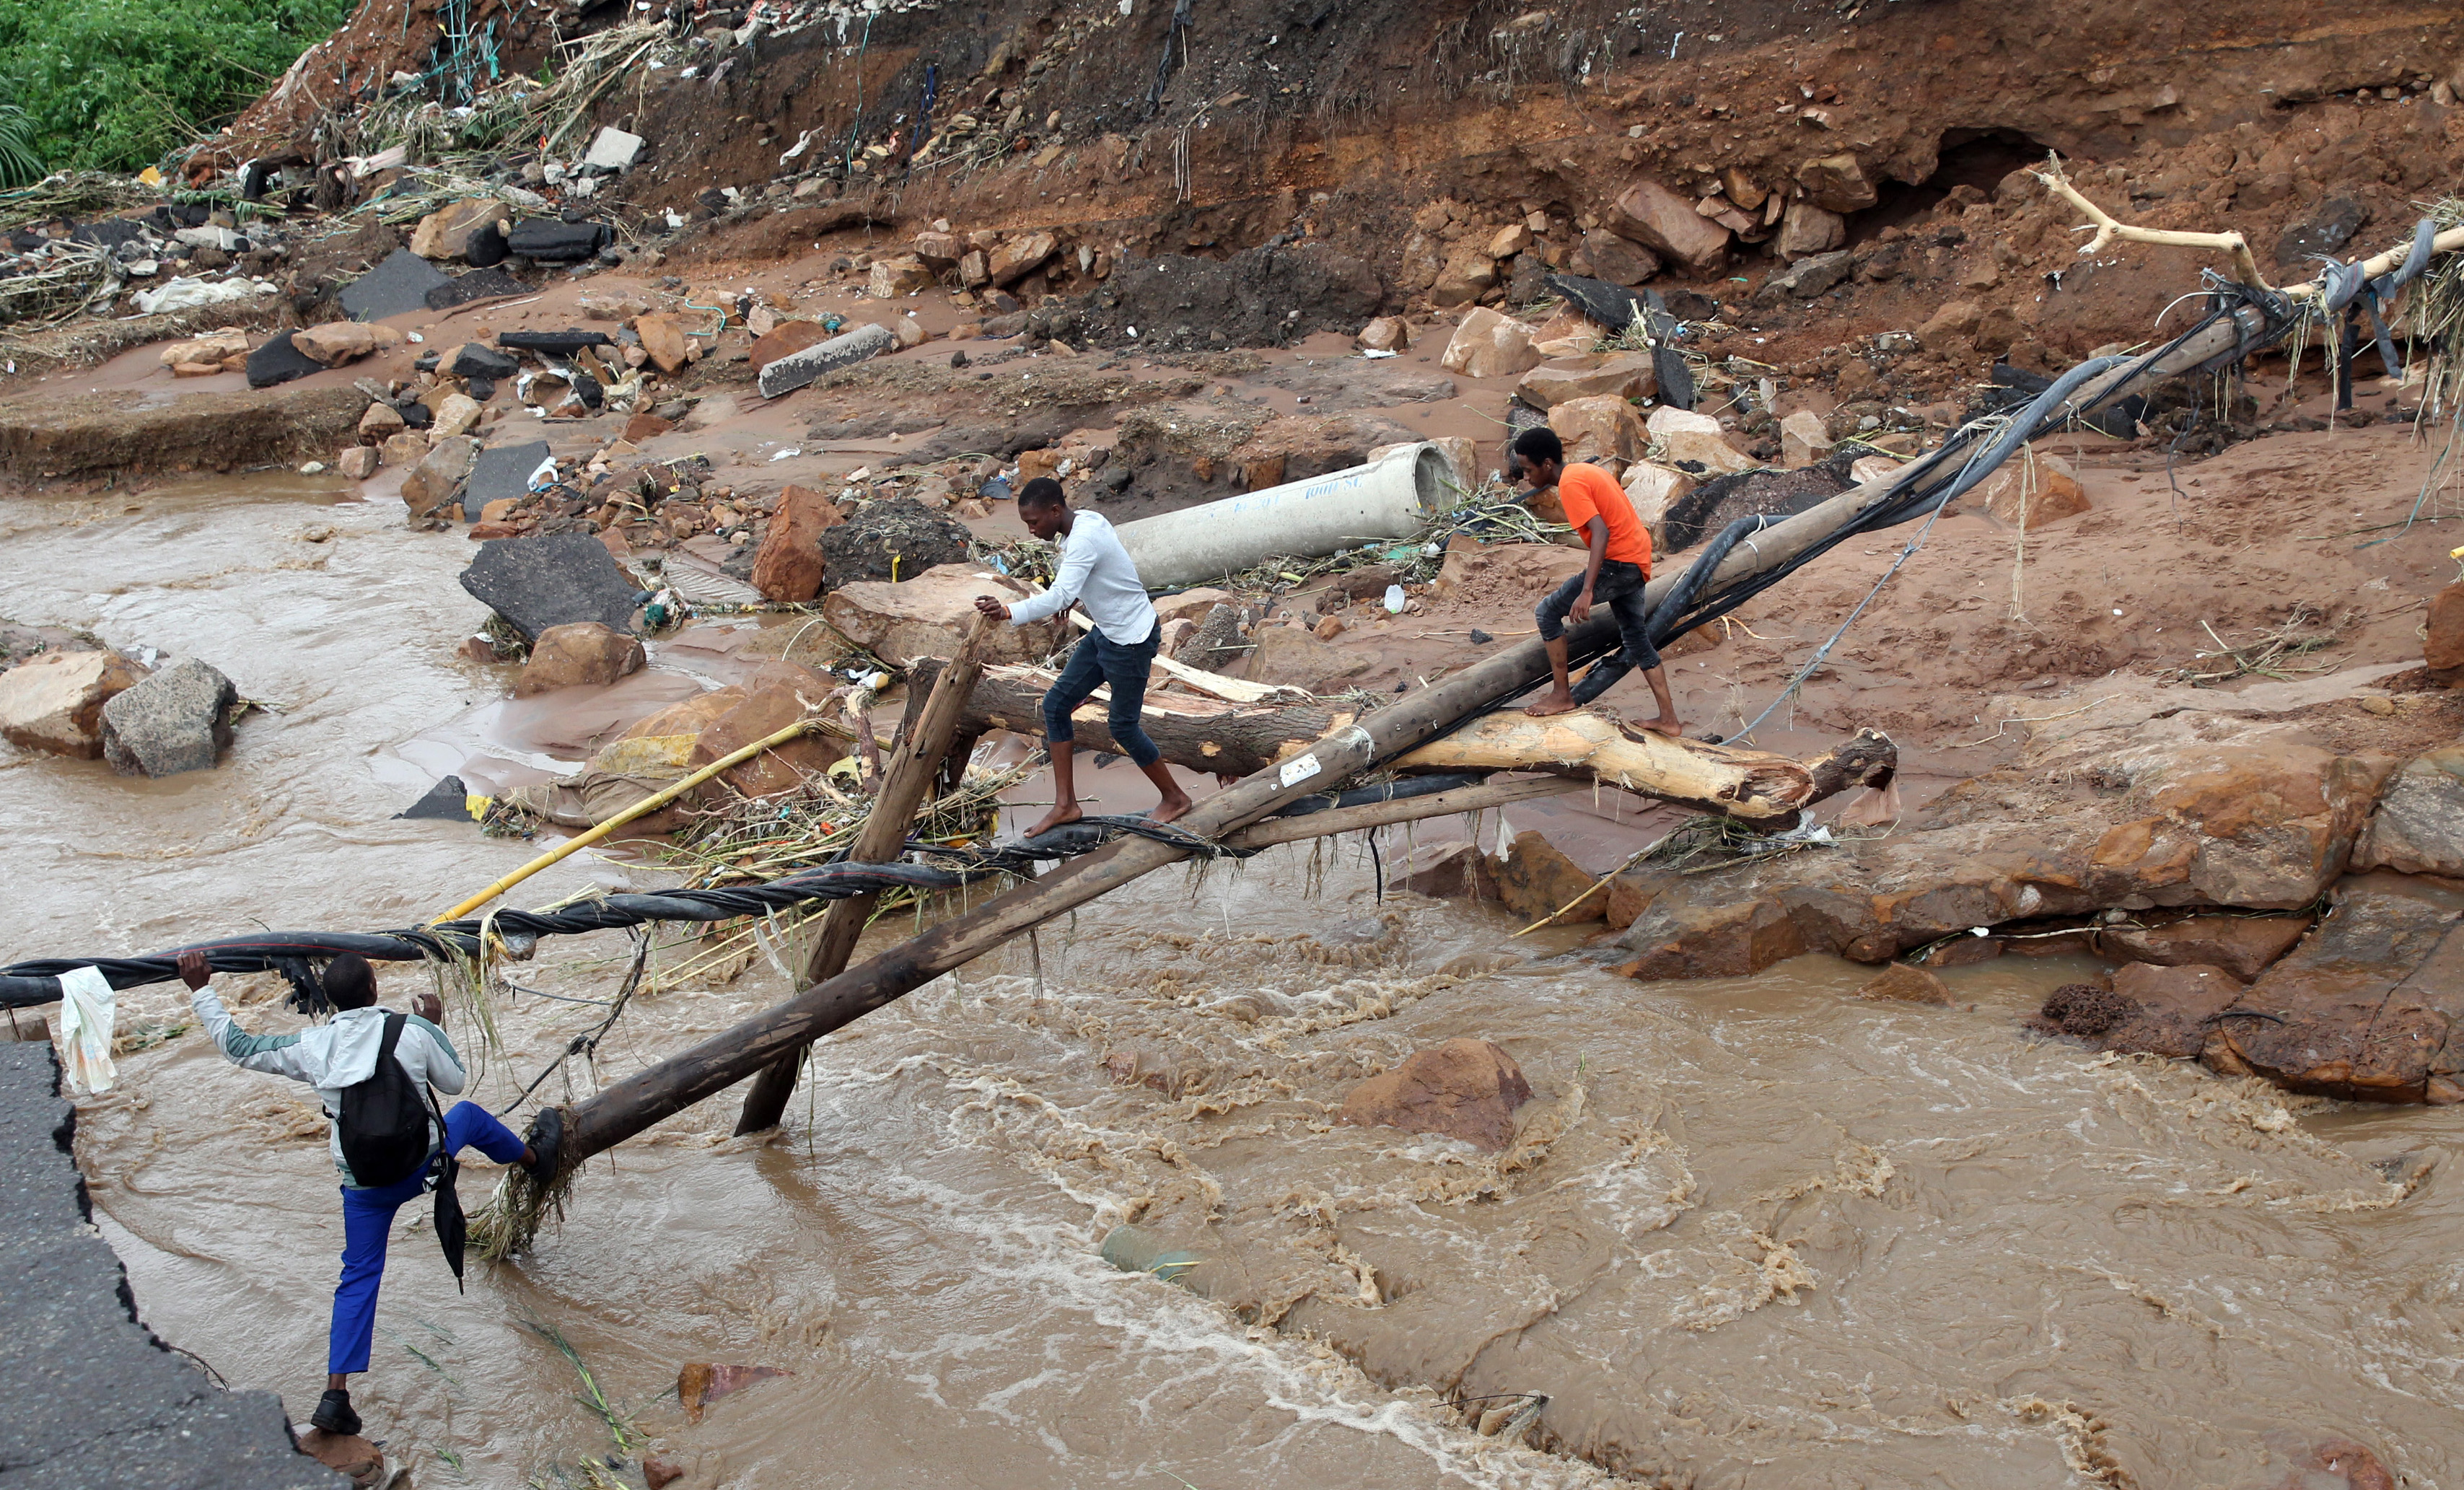 KZN floods - People trying to cross a river in Ntuzuma where a bridge was washed away.